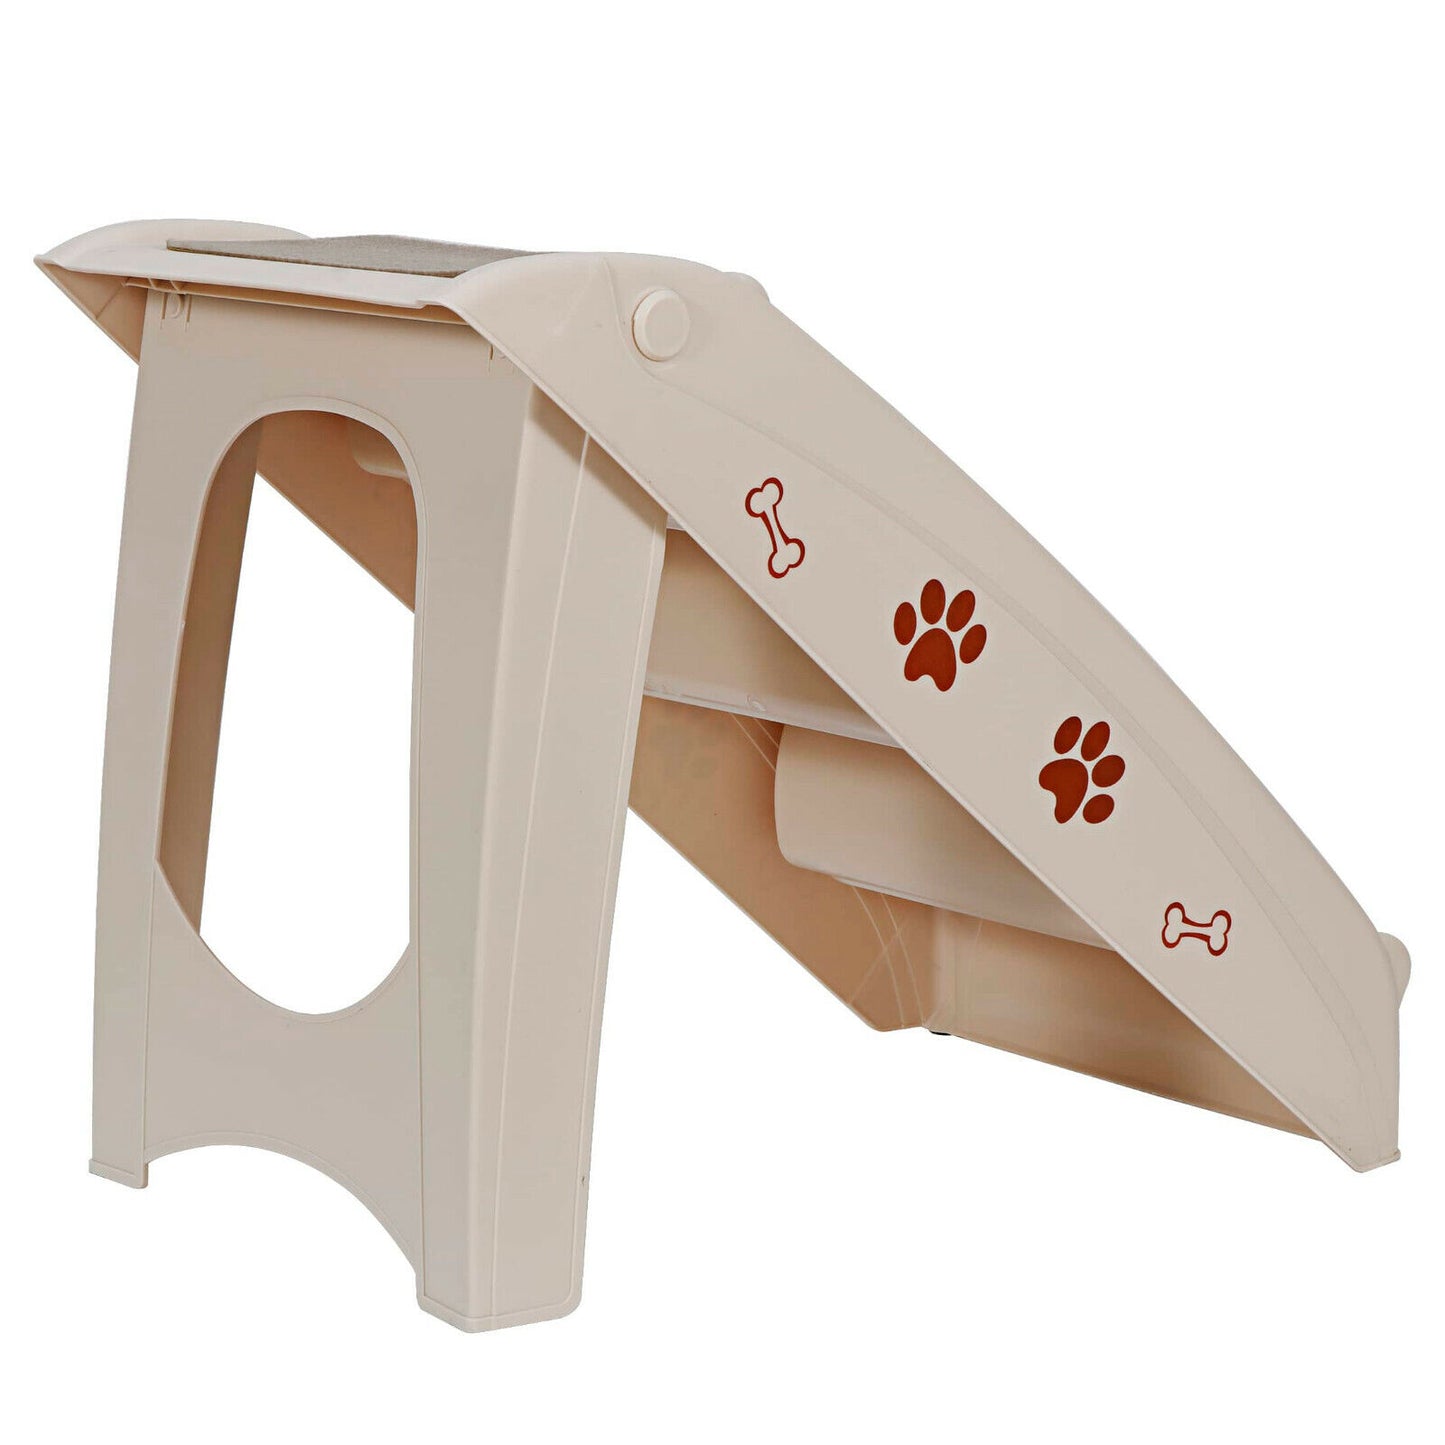 Portable Dog Steps Foldable Pet Stairs Great for Smaller Hurt Older Pets Home